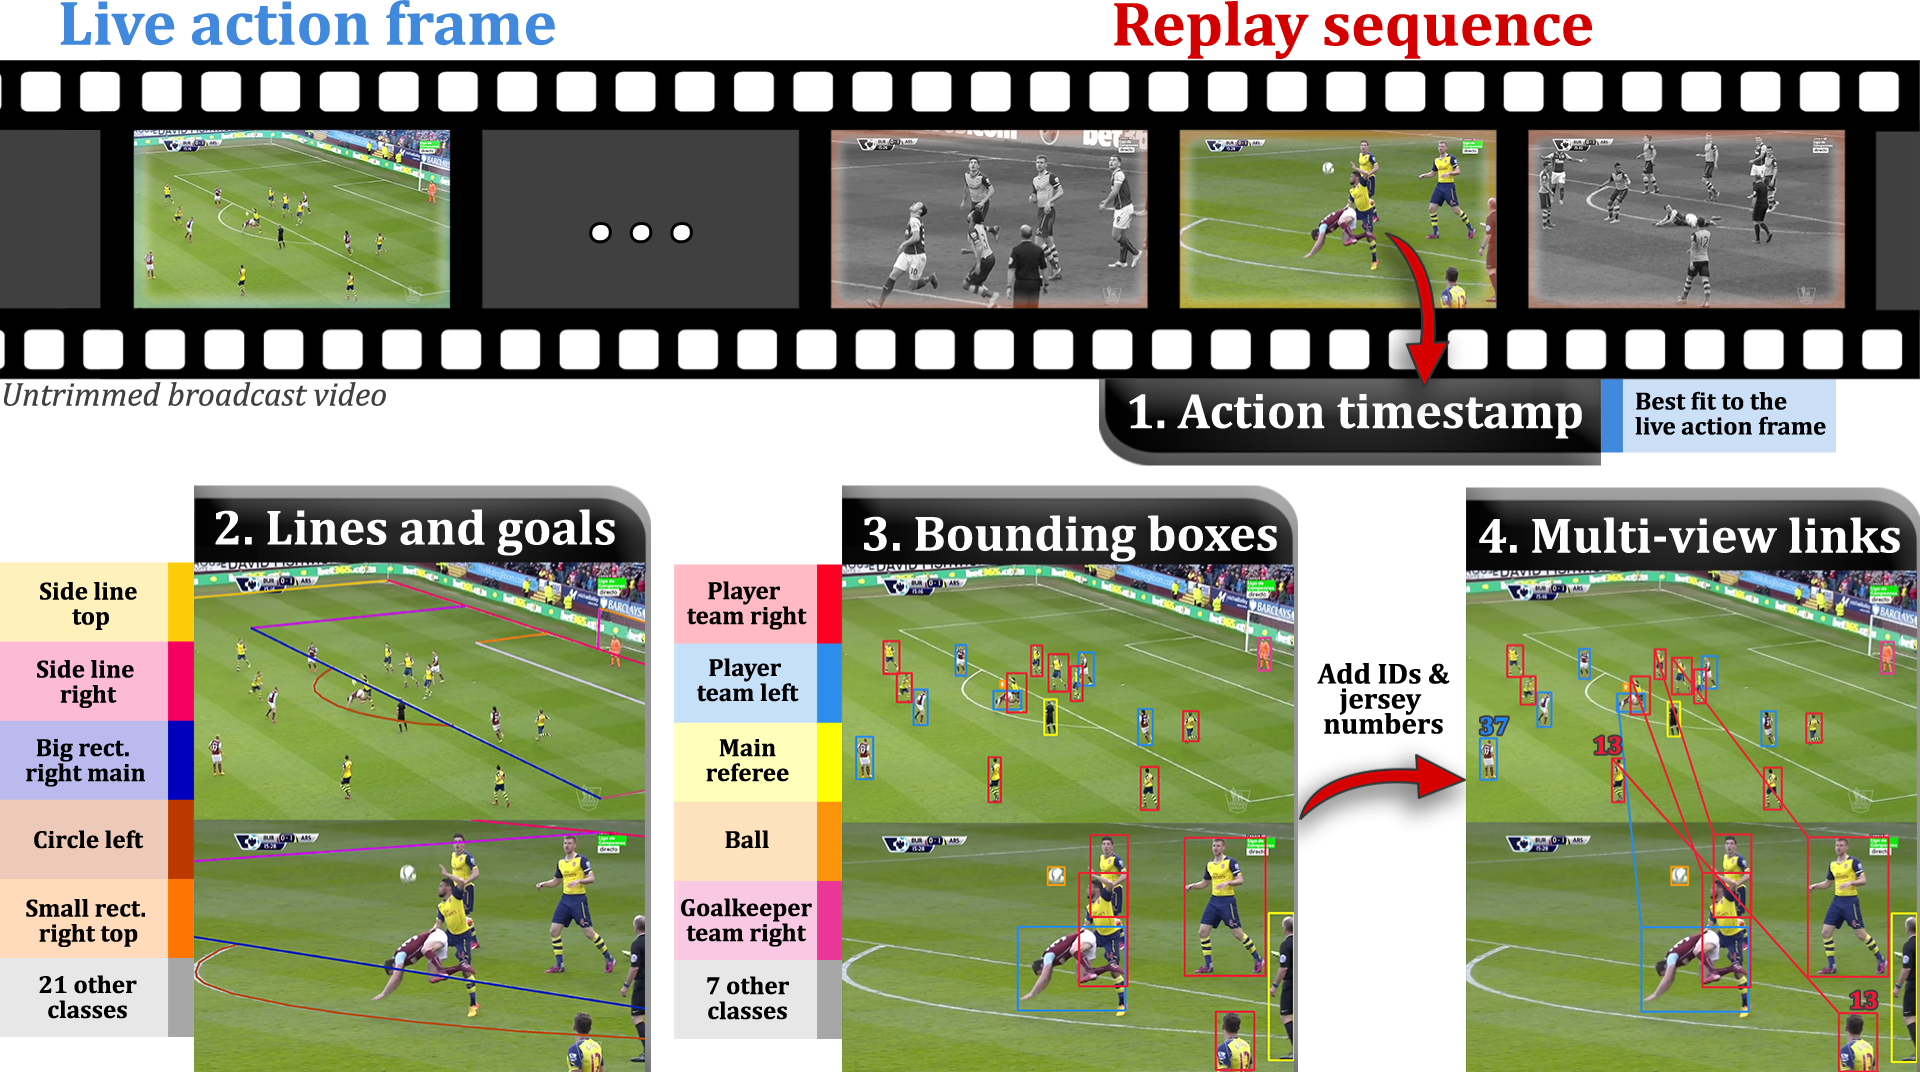 Scaling up SoccerNet with multi-view spatial localization and  re-identification | Scientific Data